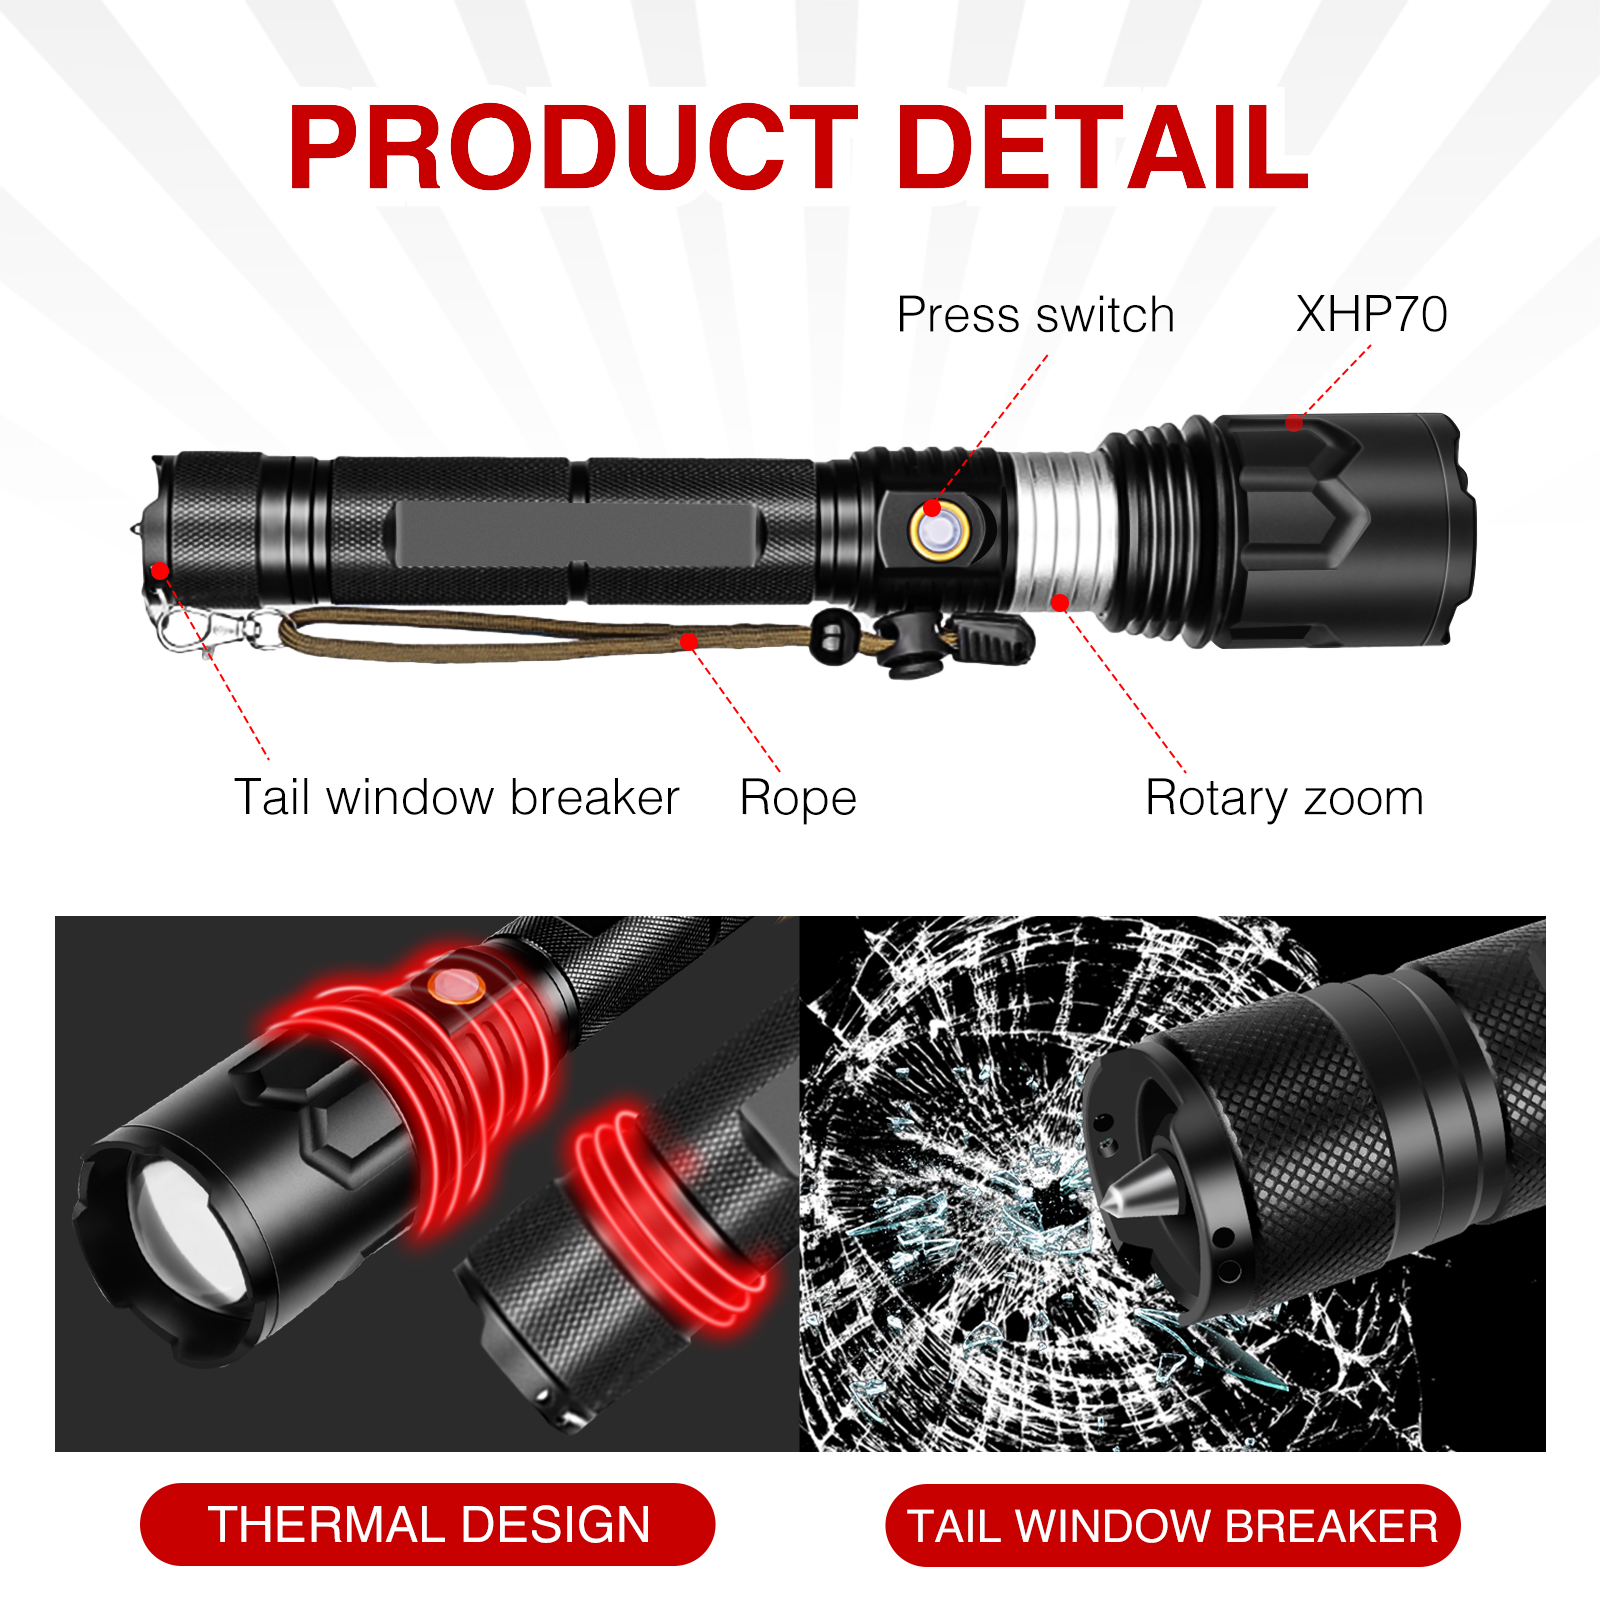 P70-USB-Rechargeable-Flashlight-with-Zoom-and-Output-Rechargeable-Battery-with-Hand-Strap-1890364-5